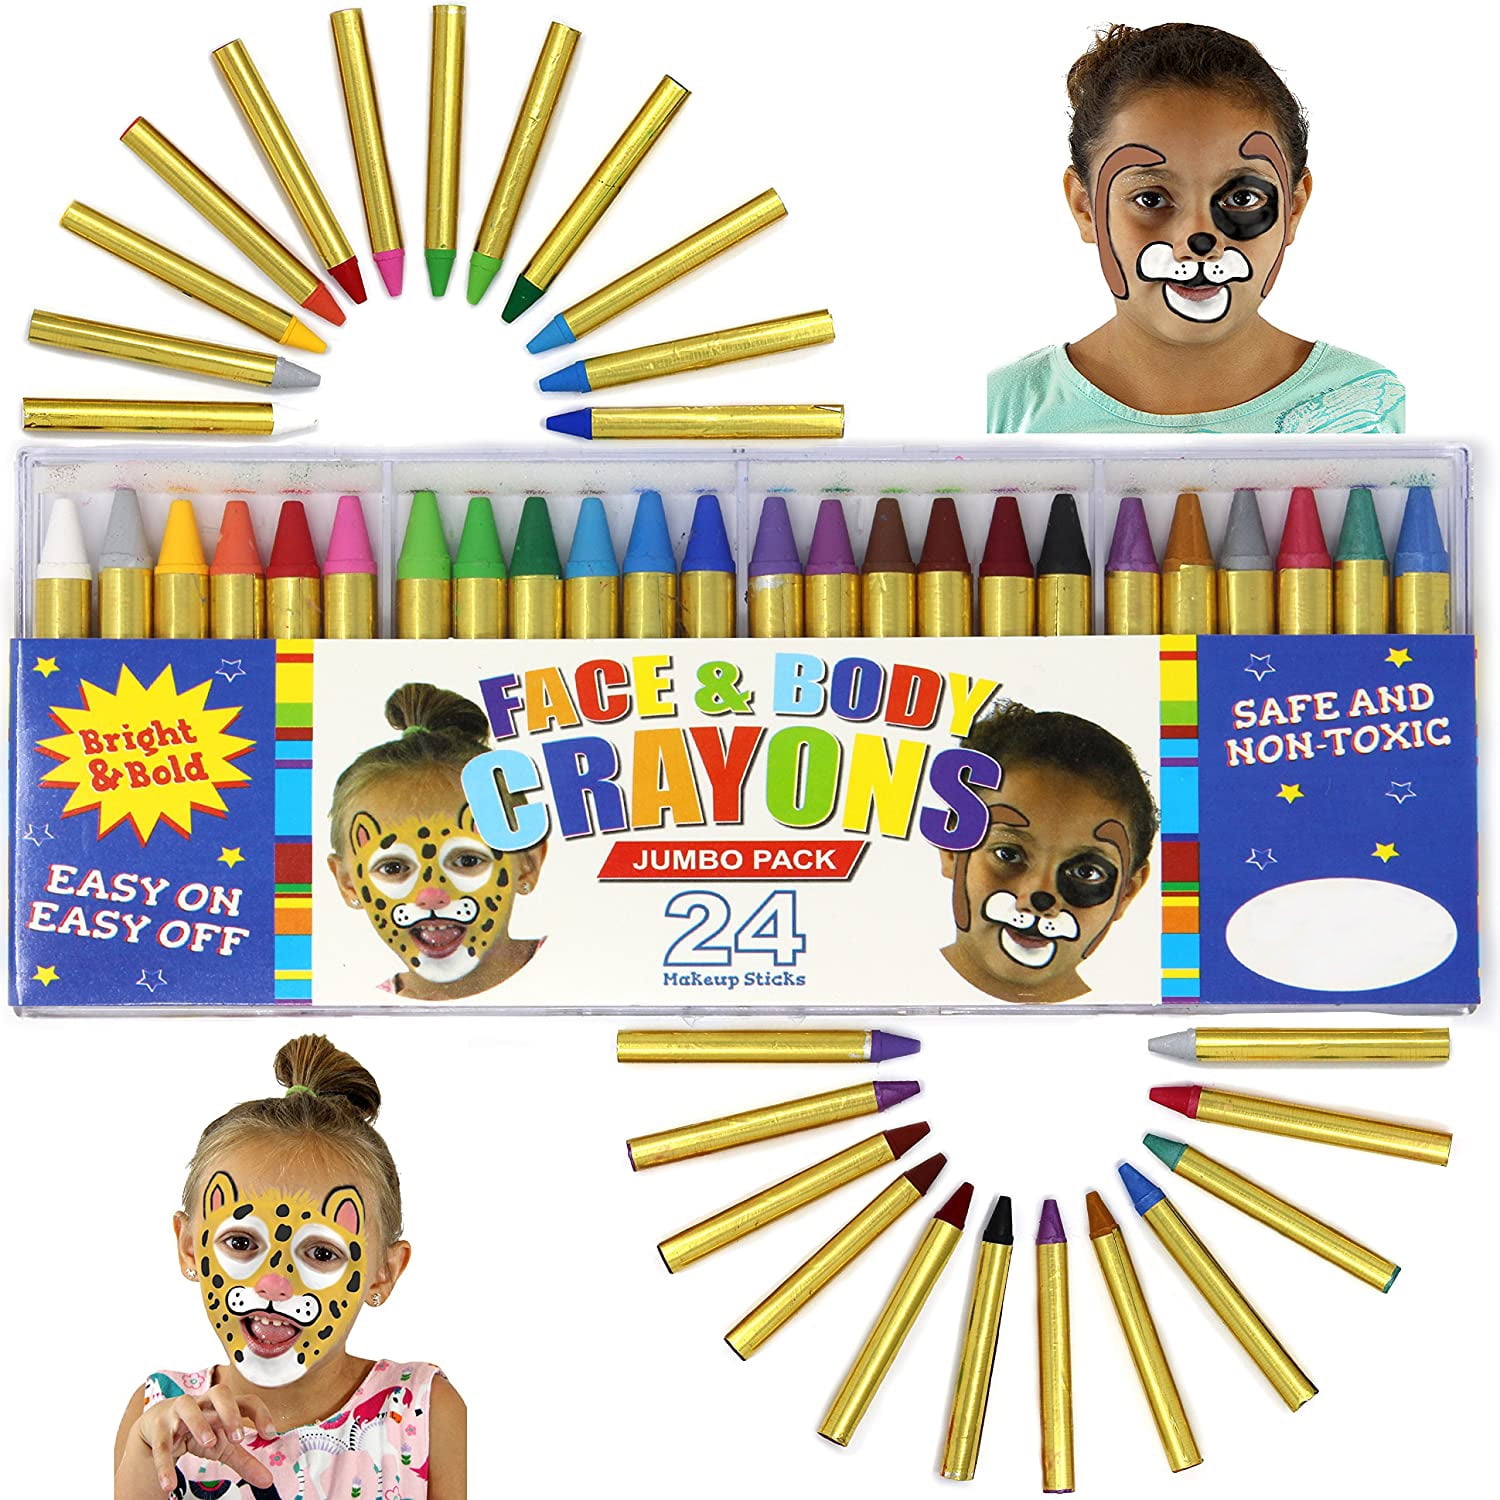 Morima Face Paint Kit for Kids,12PCS Face and Body Paint Crayons,Safe Non-Toxic Glow in Dark Face Painting Kit for Party Halloween, Boy's, Other